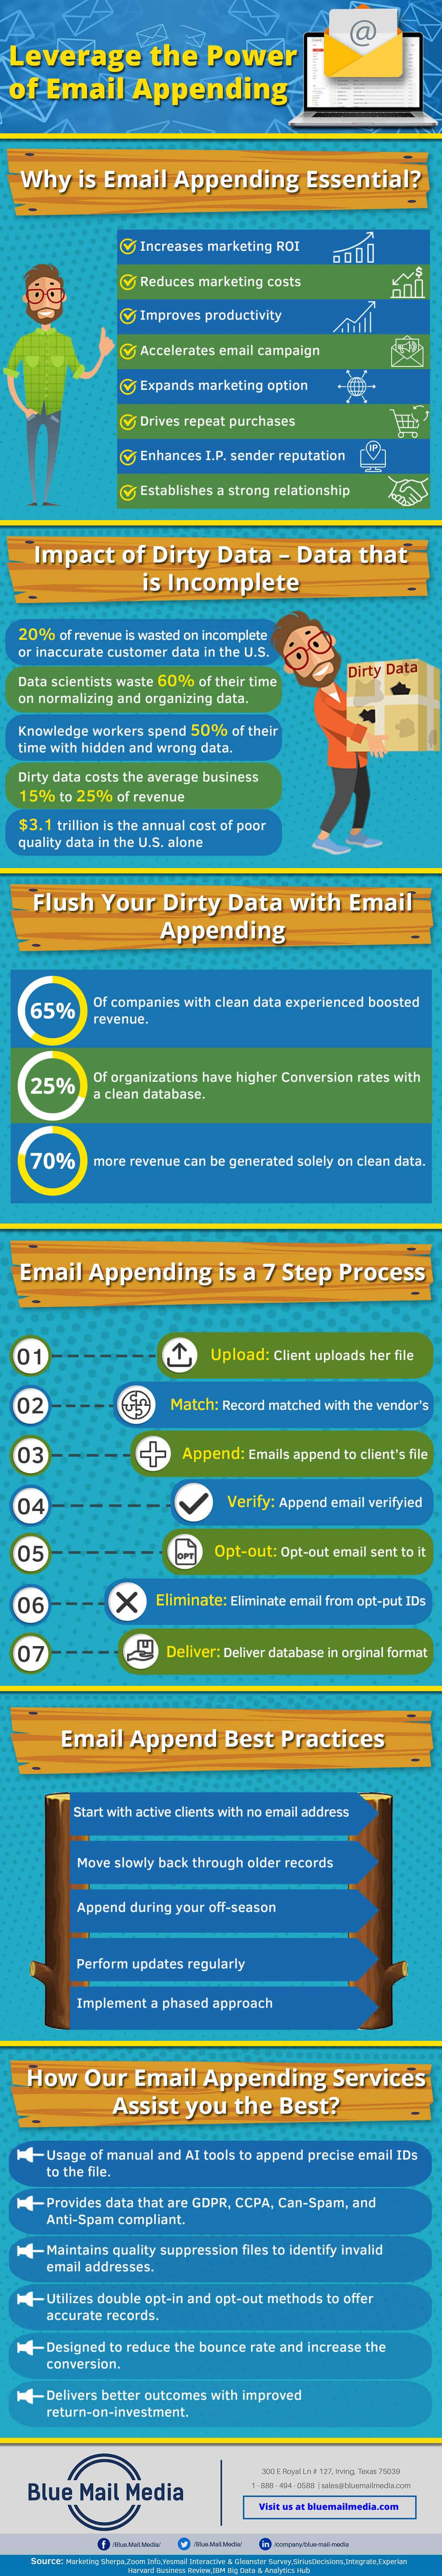 Benefits of Email Appending